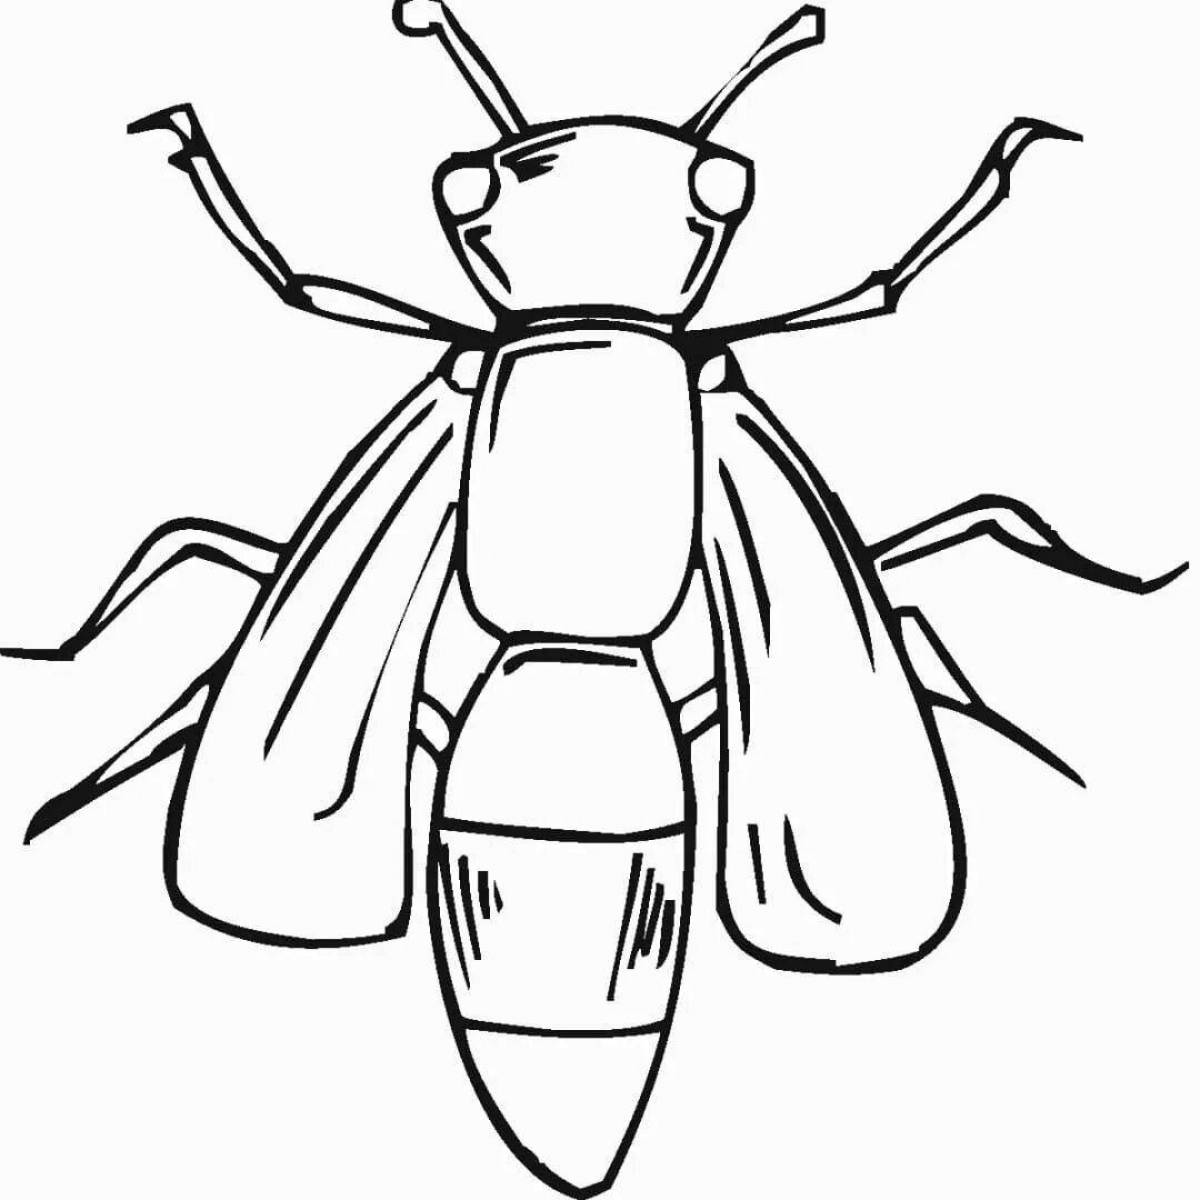 Impressive beetle coloring book for 3-4 year olds